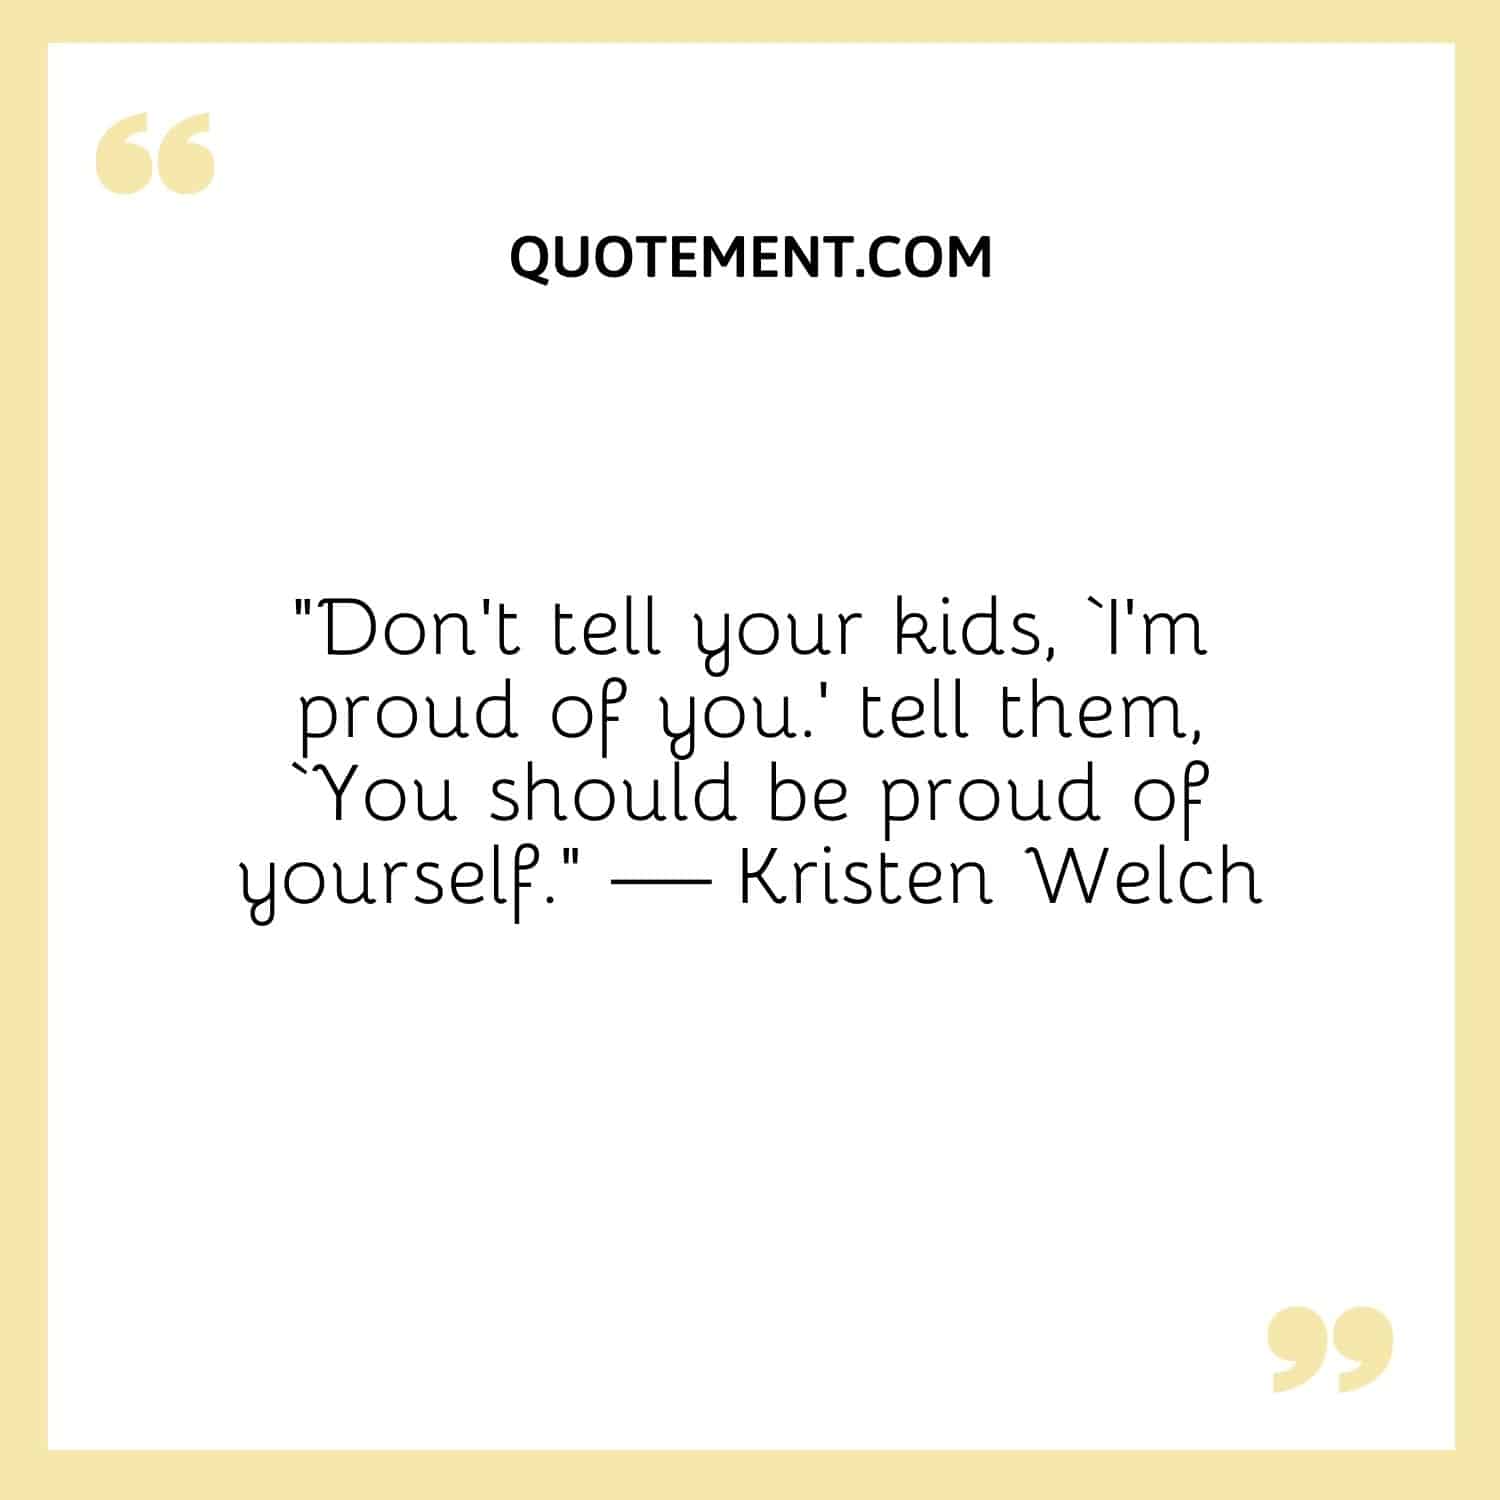 “Don’t tell your kids, ‘I’m proud of you.’ tell them, ‘You should be proud of yourself.” — Kristen Welch